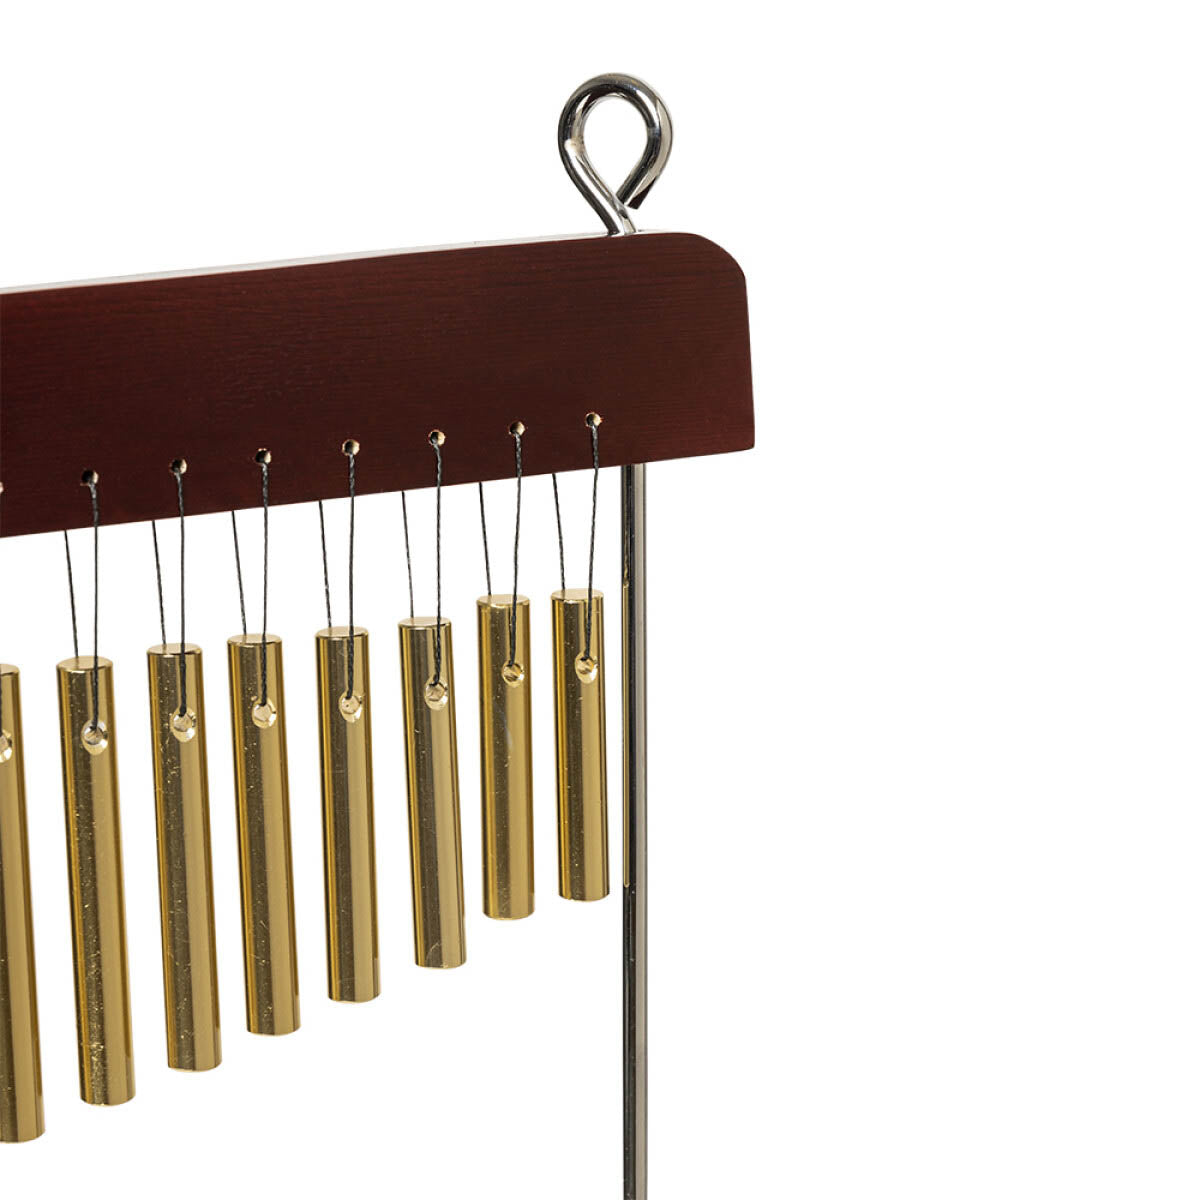 Stagg Bar Chimes - 36 Bars